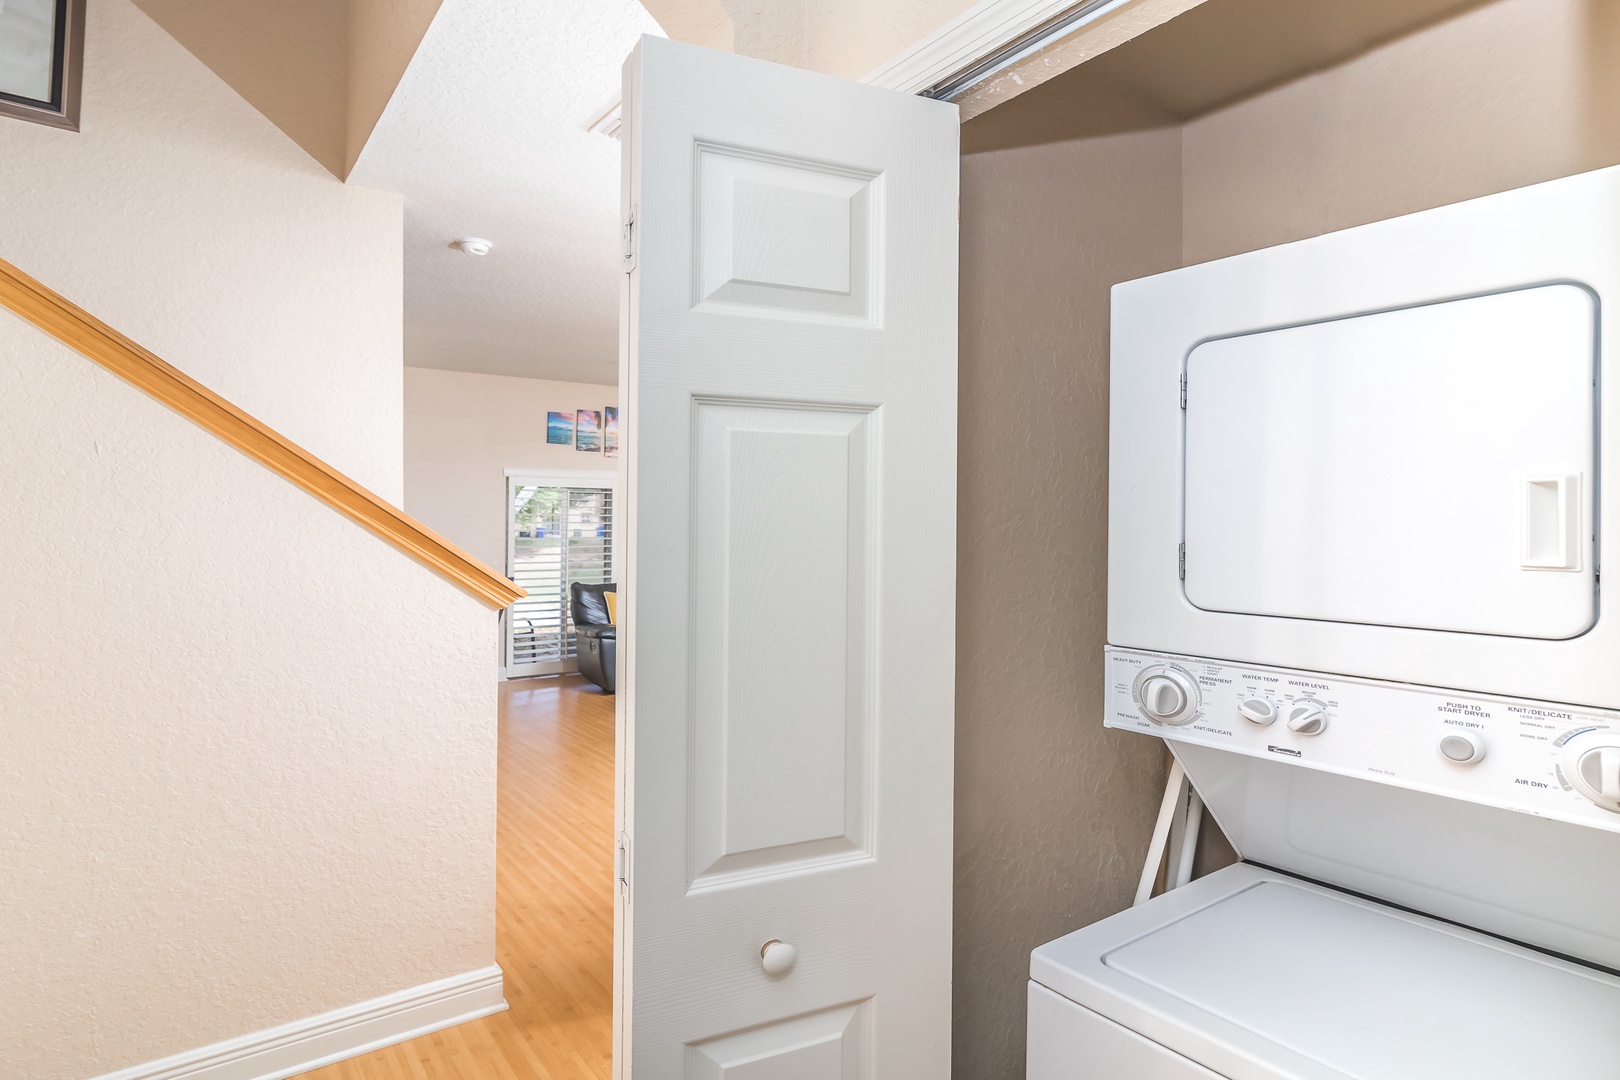 A laundry closet with a stackable washer and dryer is available for guest use